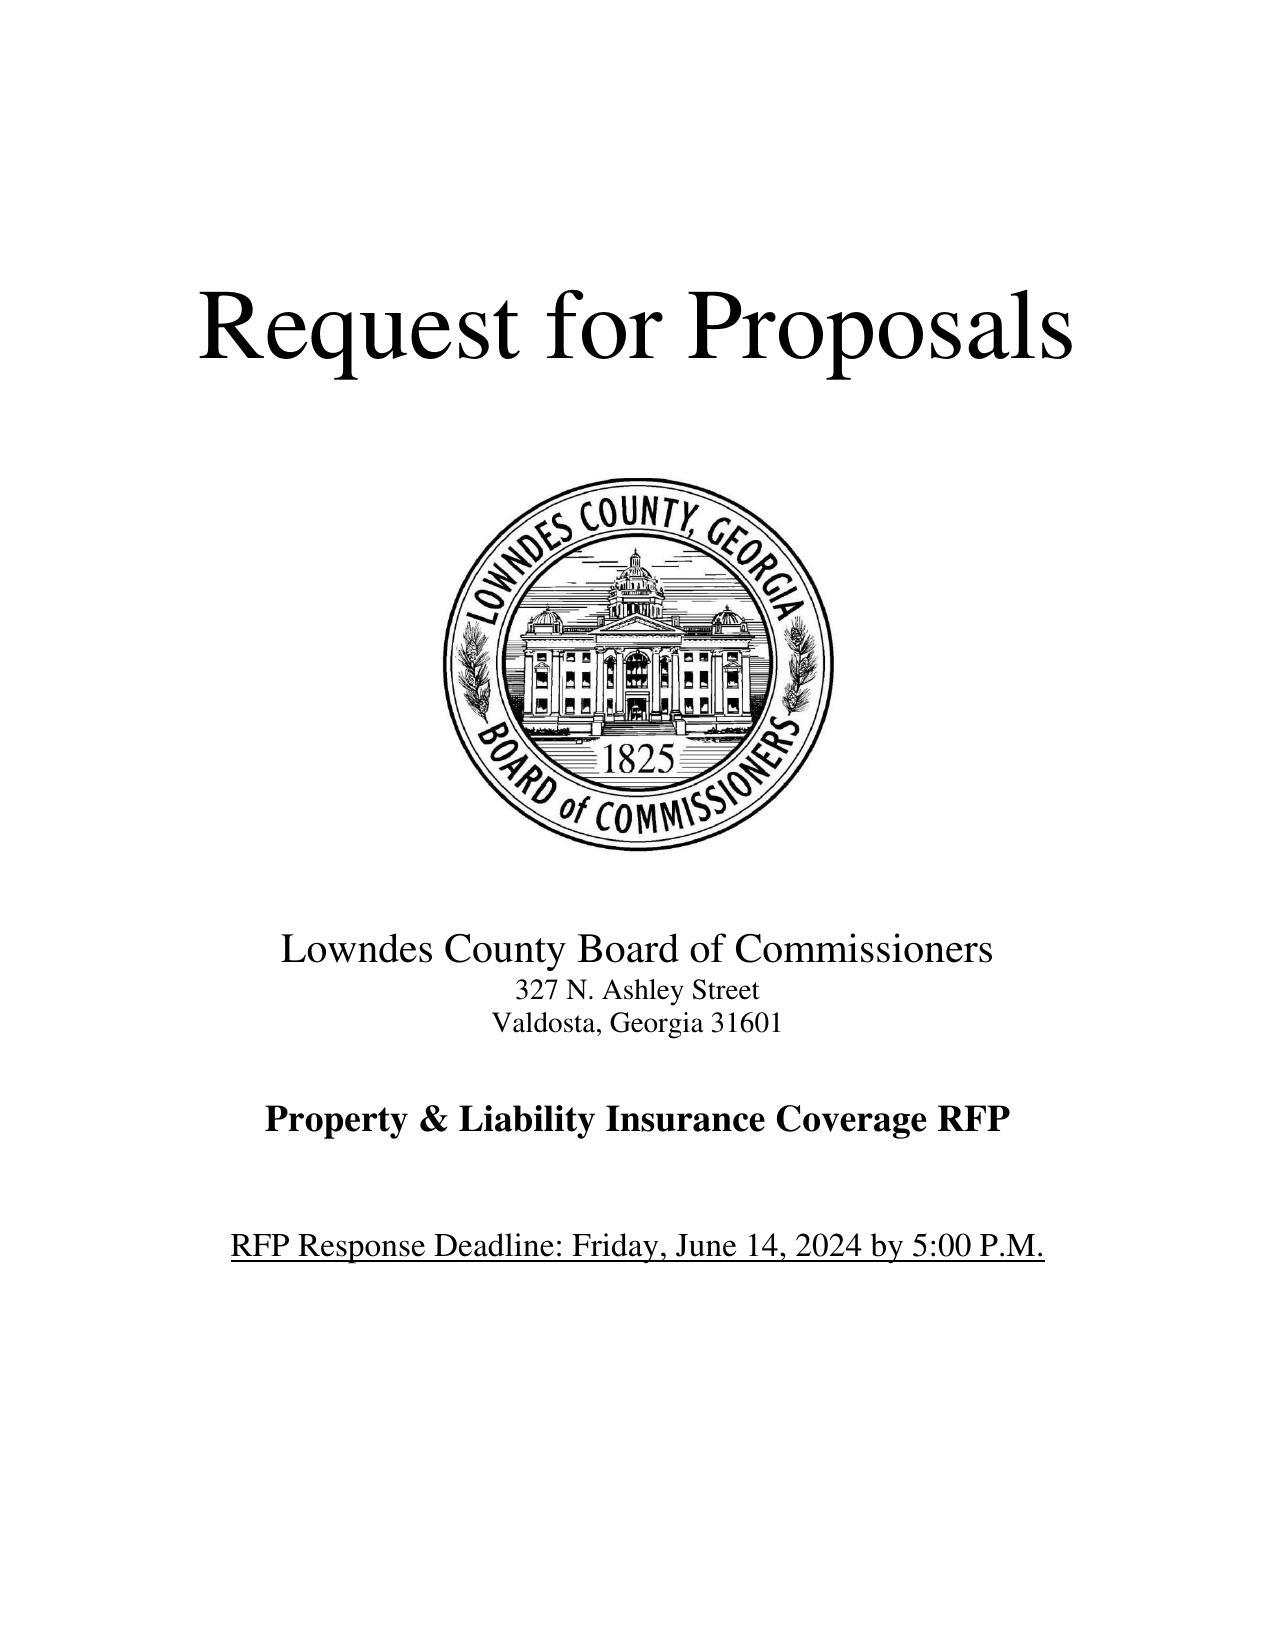 Property & Liability Insurance Coverage RFP